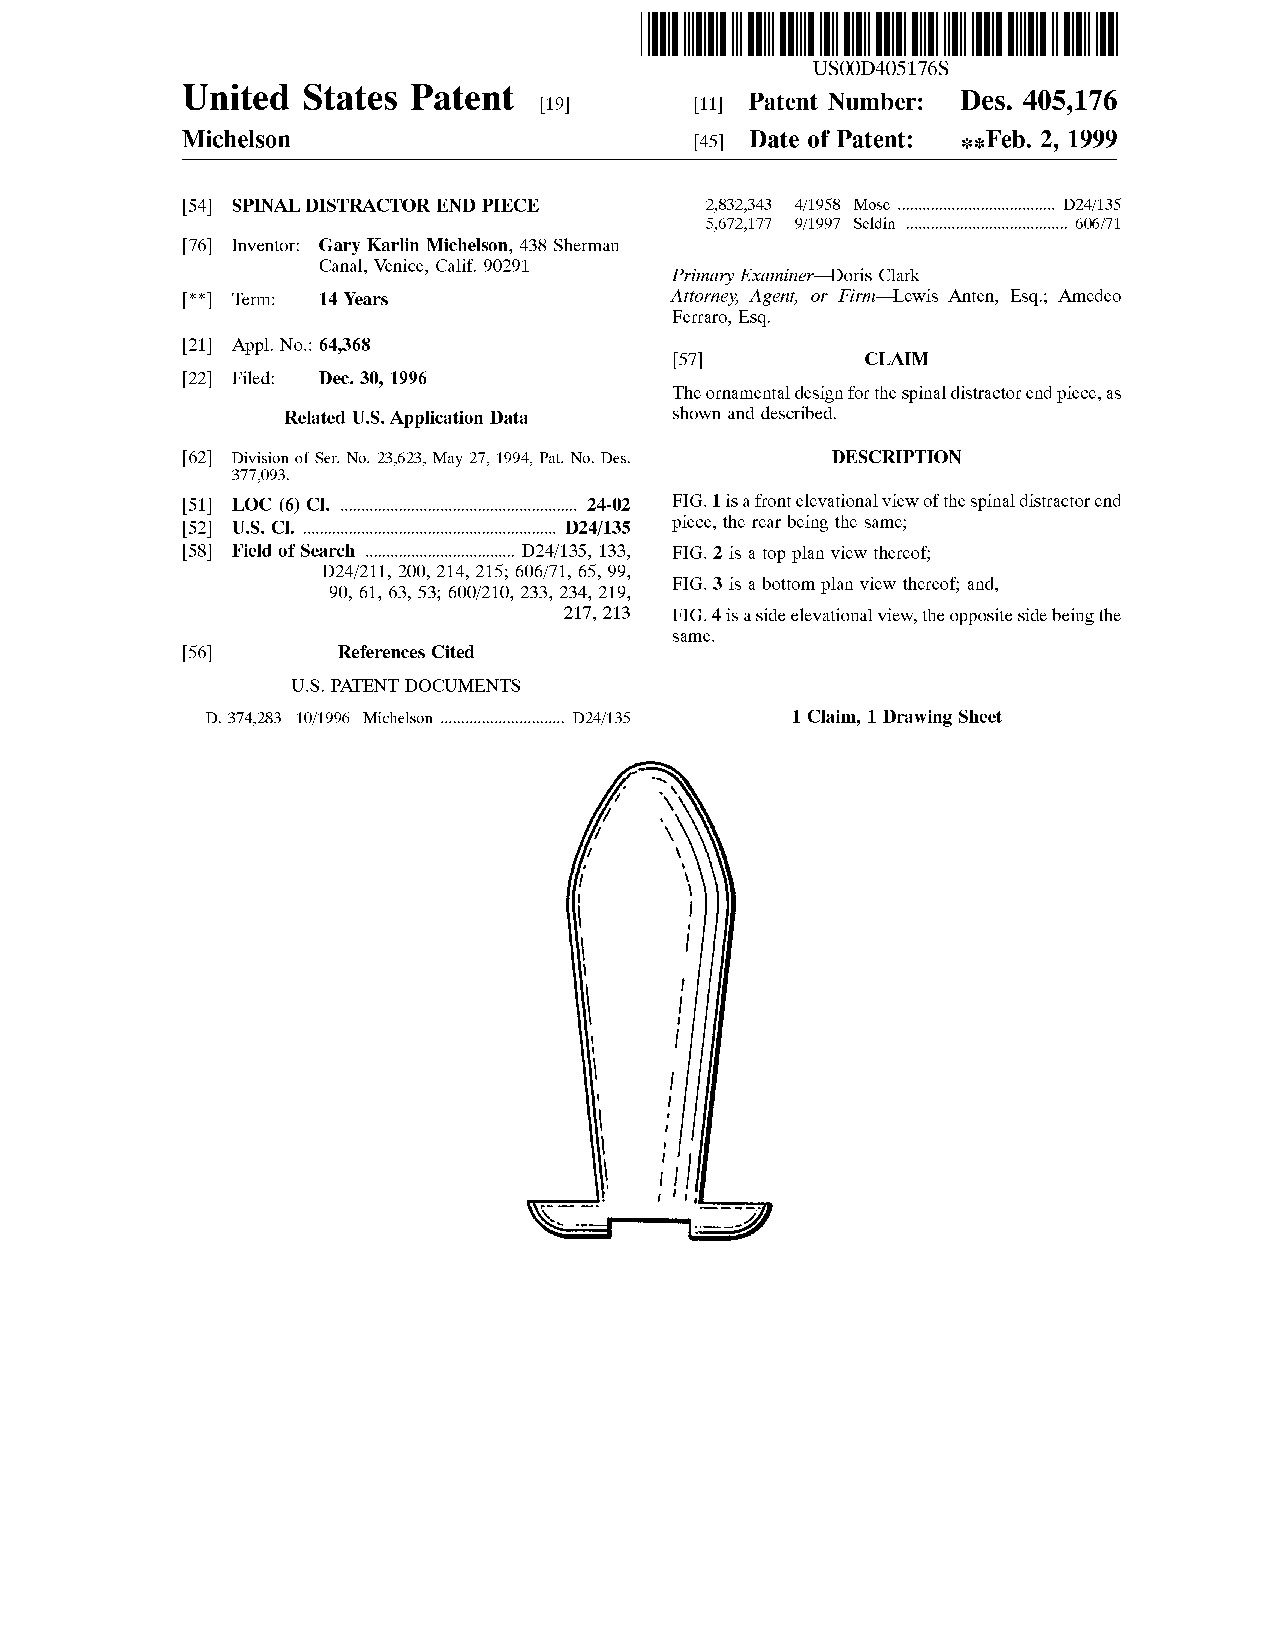 Spinal distractor end piece - Patent D405,176